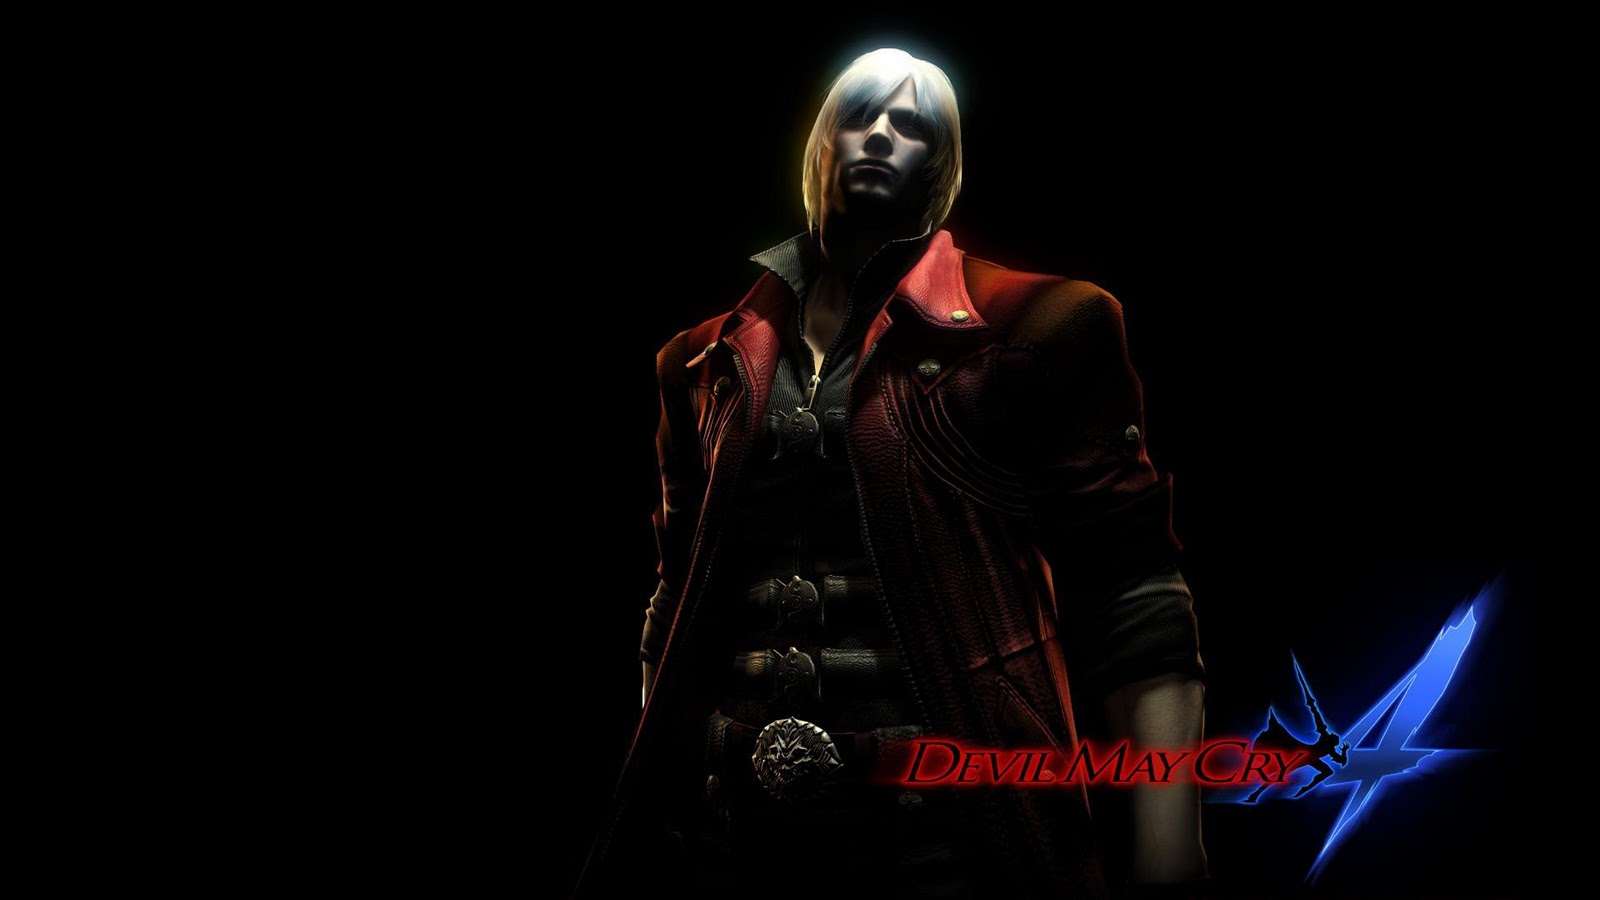 HD wallpapers devil may cry 4 hd wallpaper